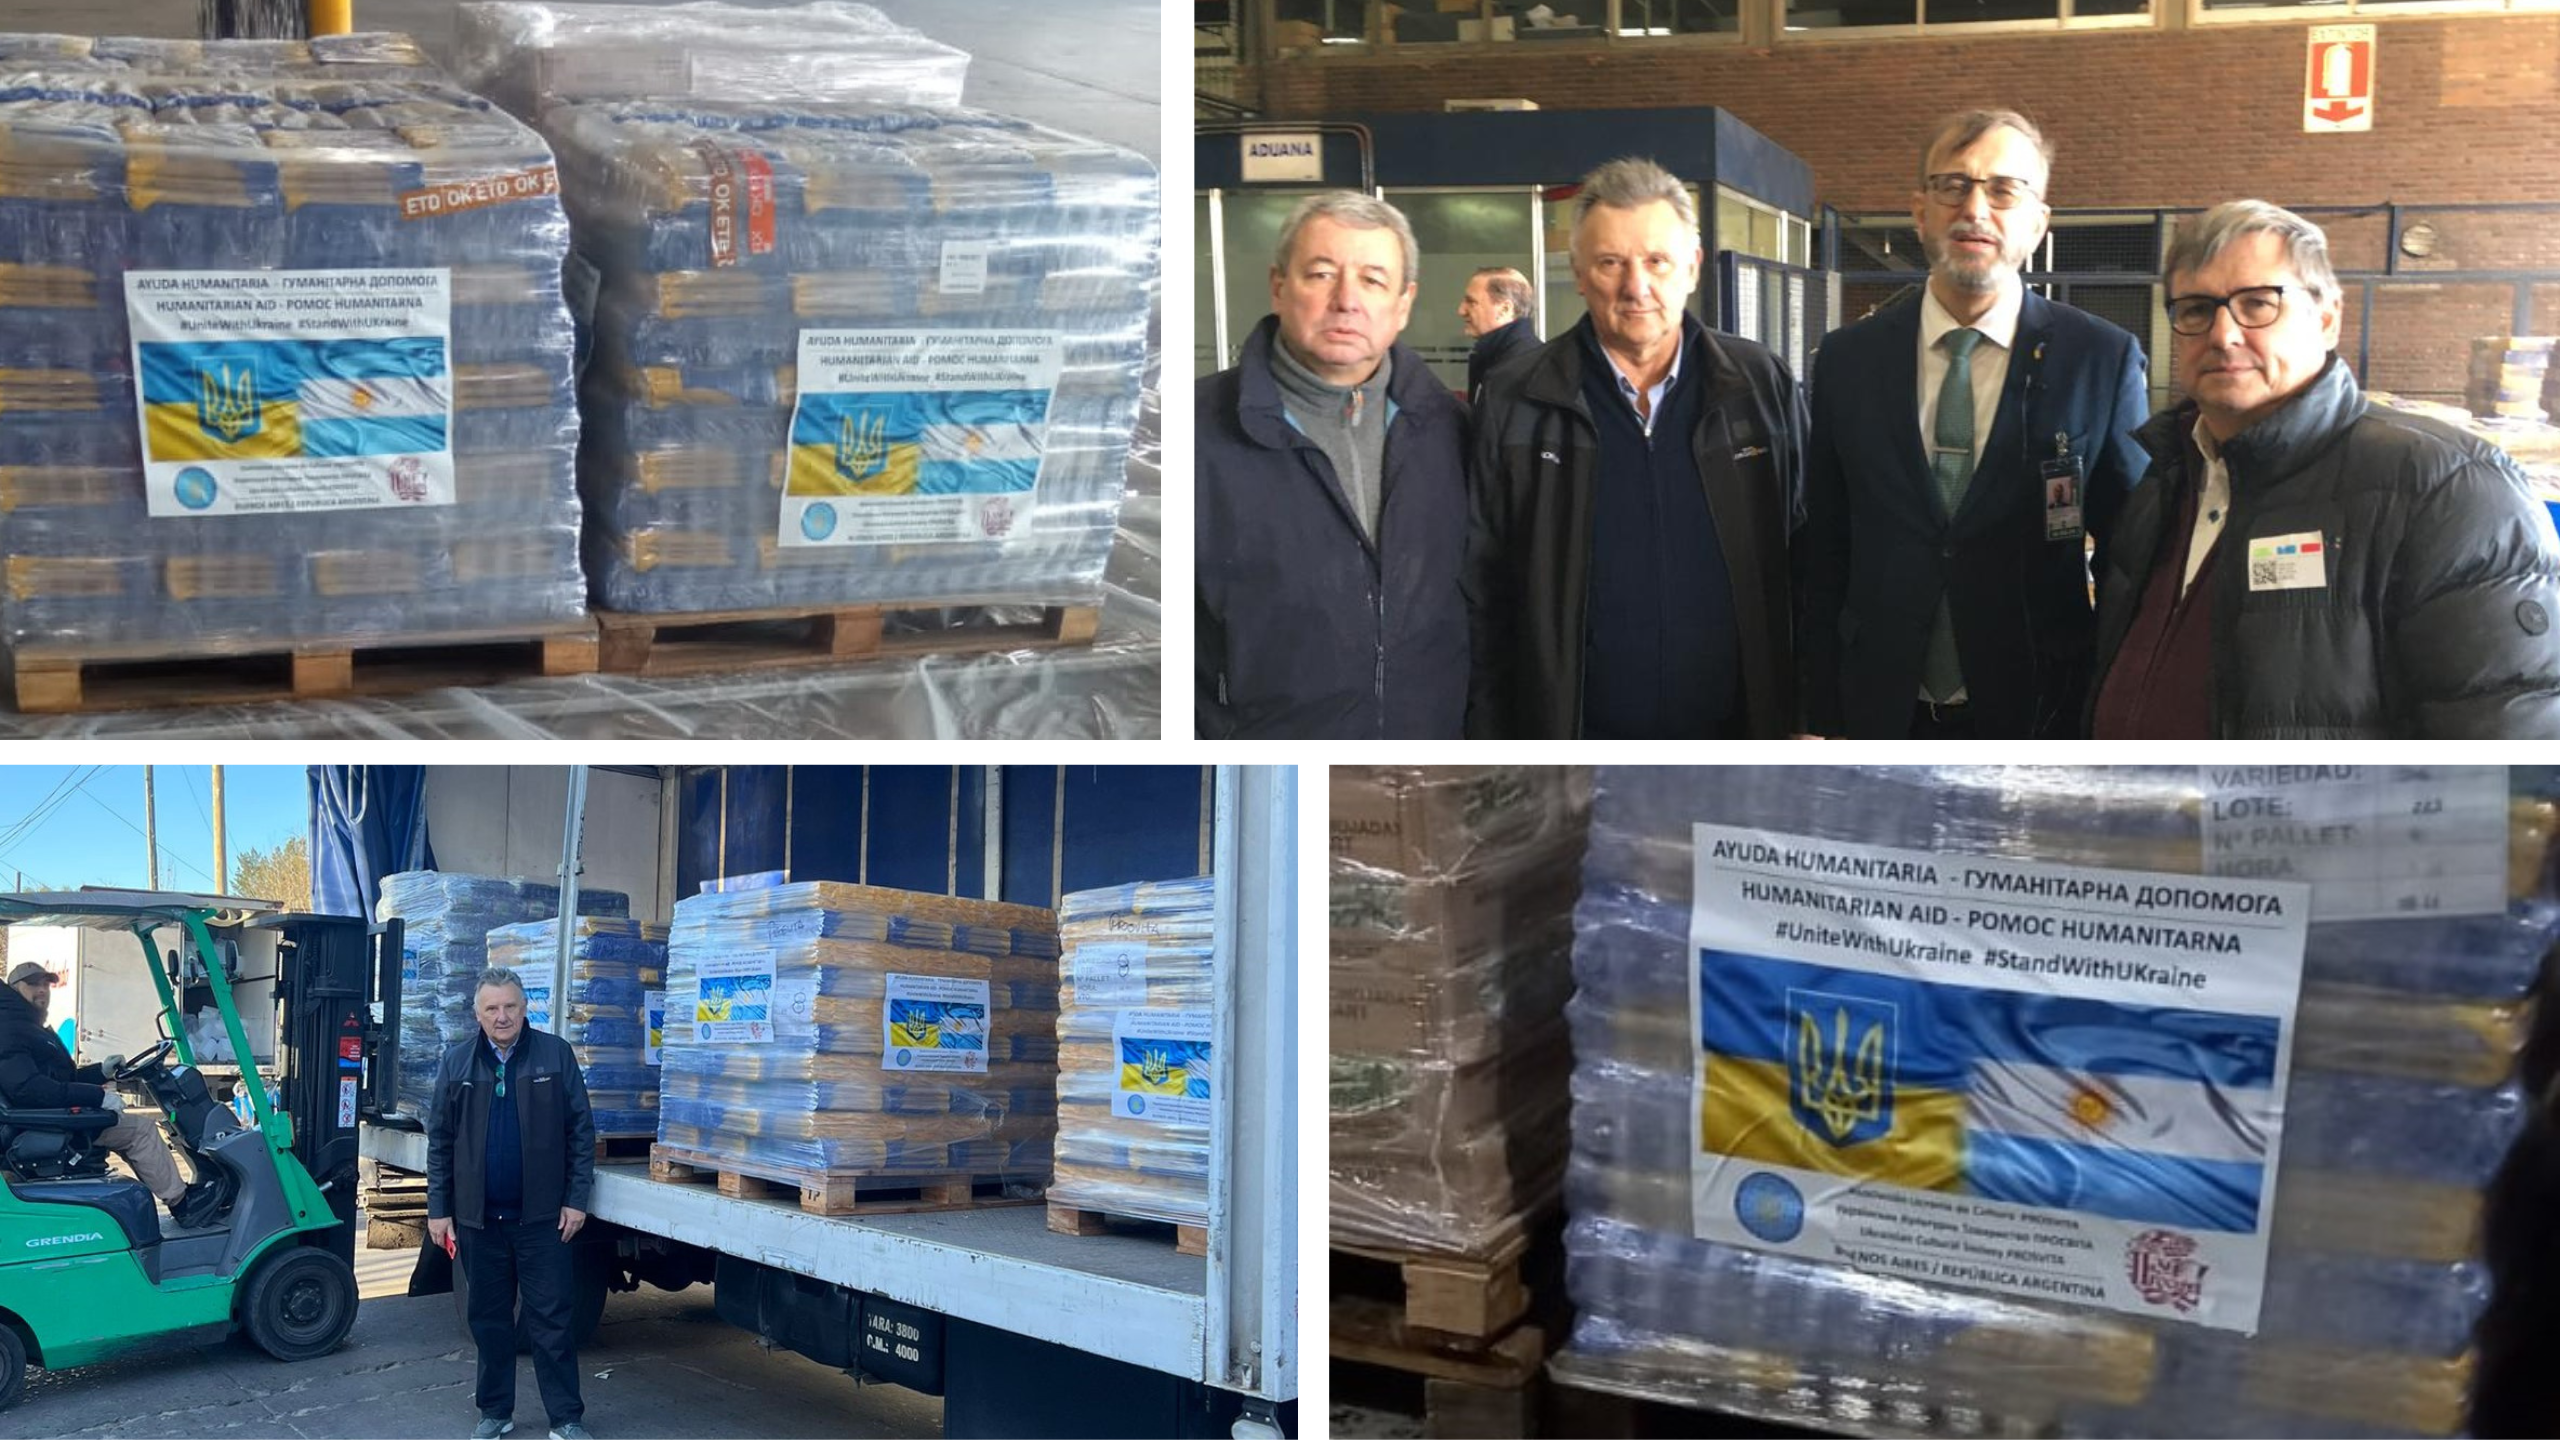 Danylyszyn: Another batch of aid is coming from Argentina to Ukraine